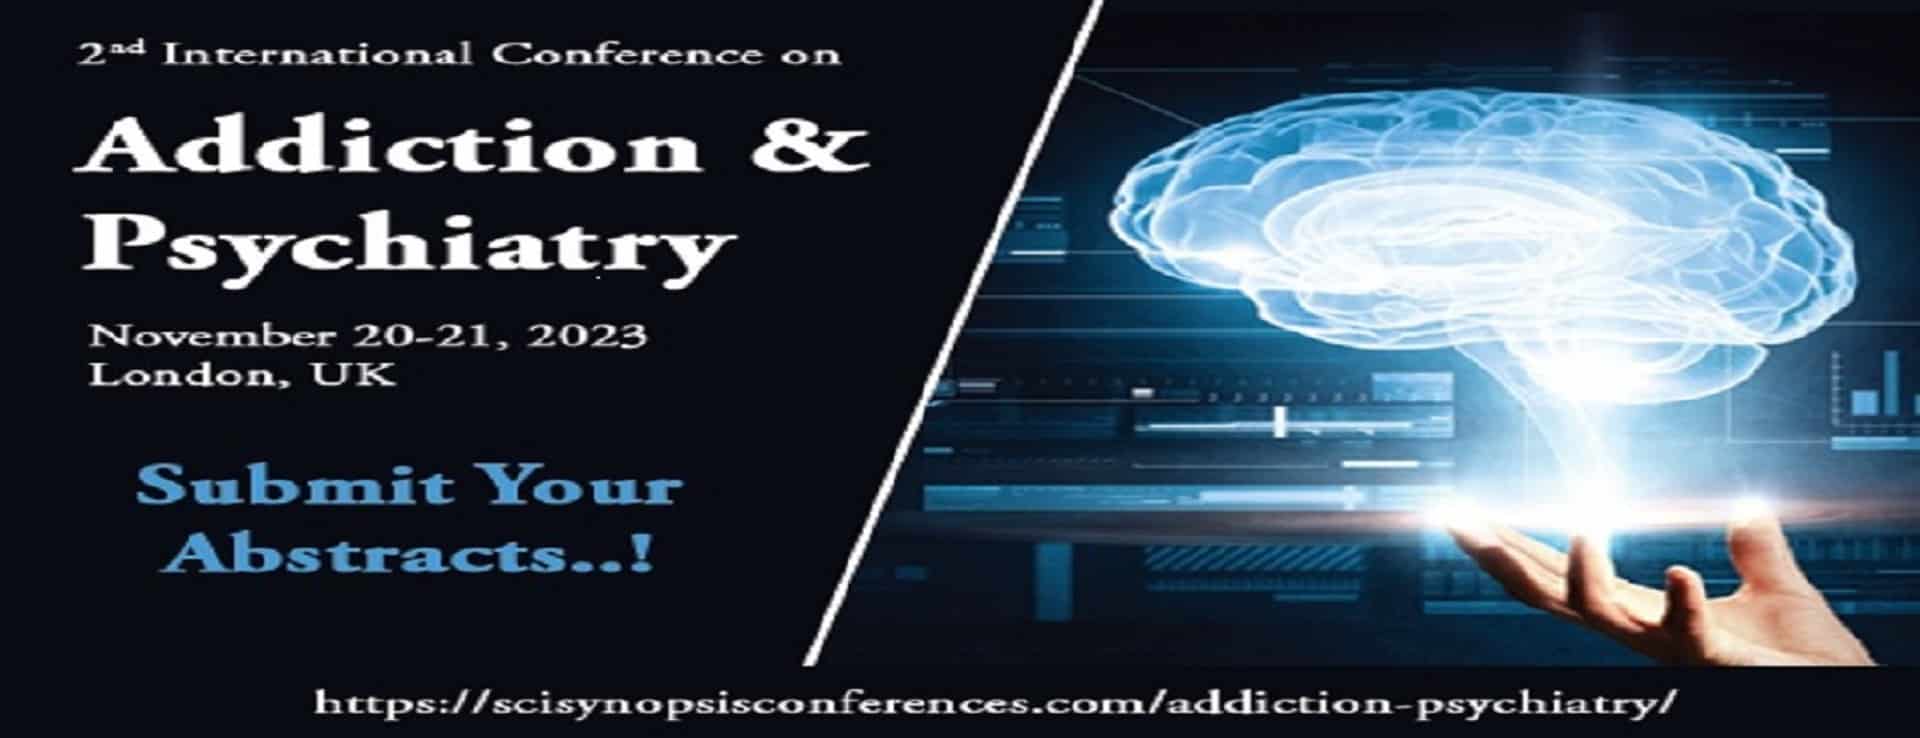 2nd International Conference on Addiction & Psychiatry